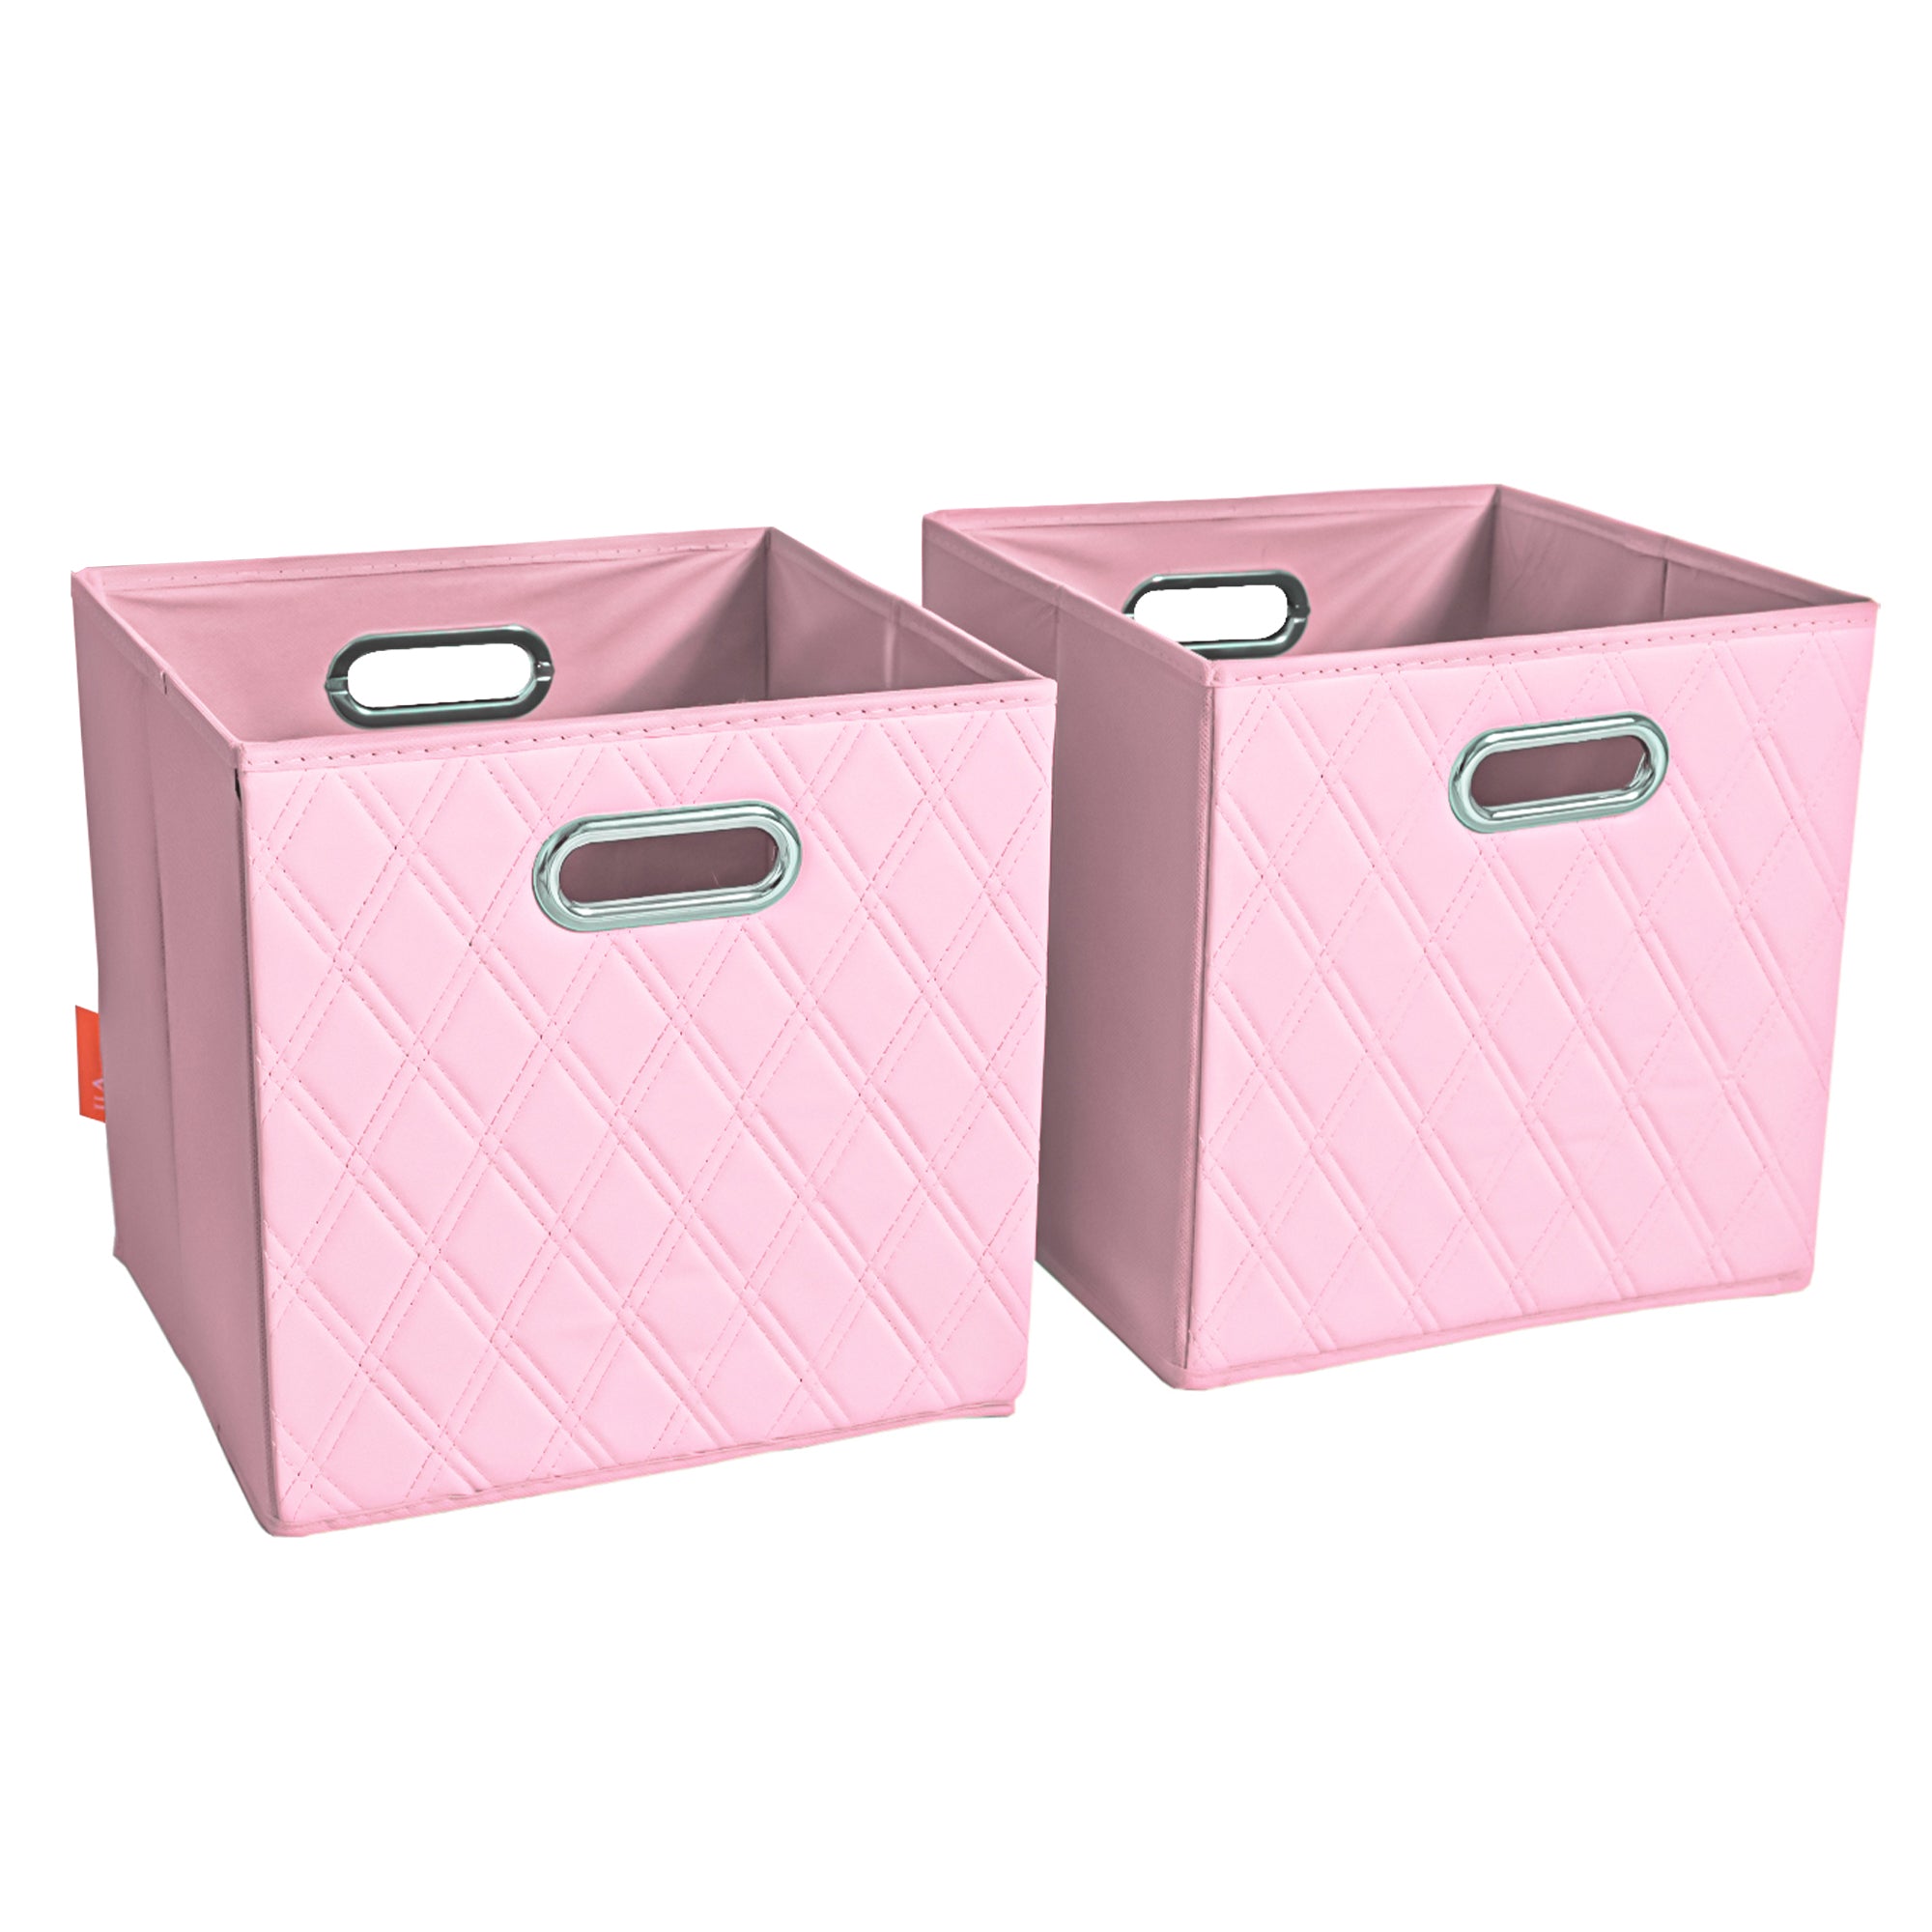 JIAessentials 13 inch Foldable Diamond Patterned Faux Leather Storage Cube Bins Set of Two with Dual Handles - 13" Pink